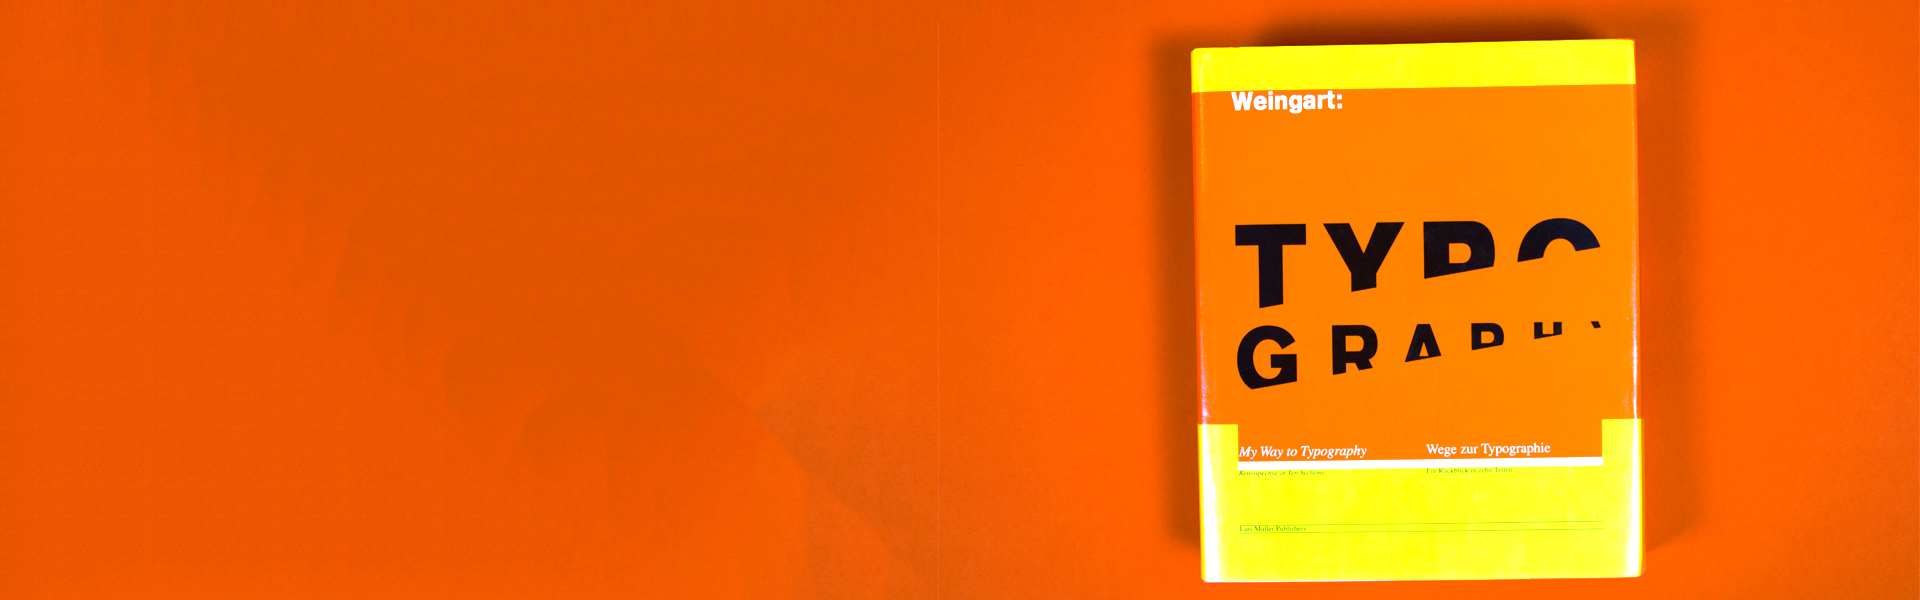 Thumbnail for: Shillington Book Club: My Way to Typography by Wolfgang Weingart 